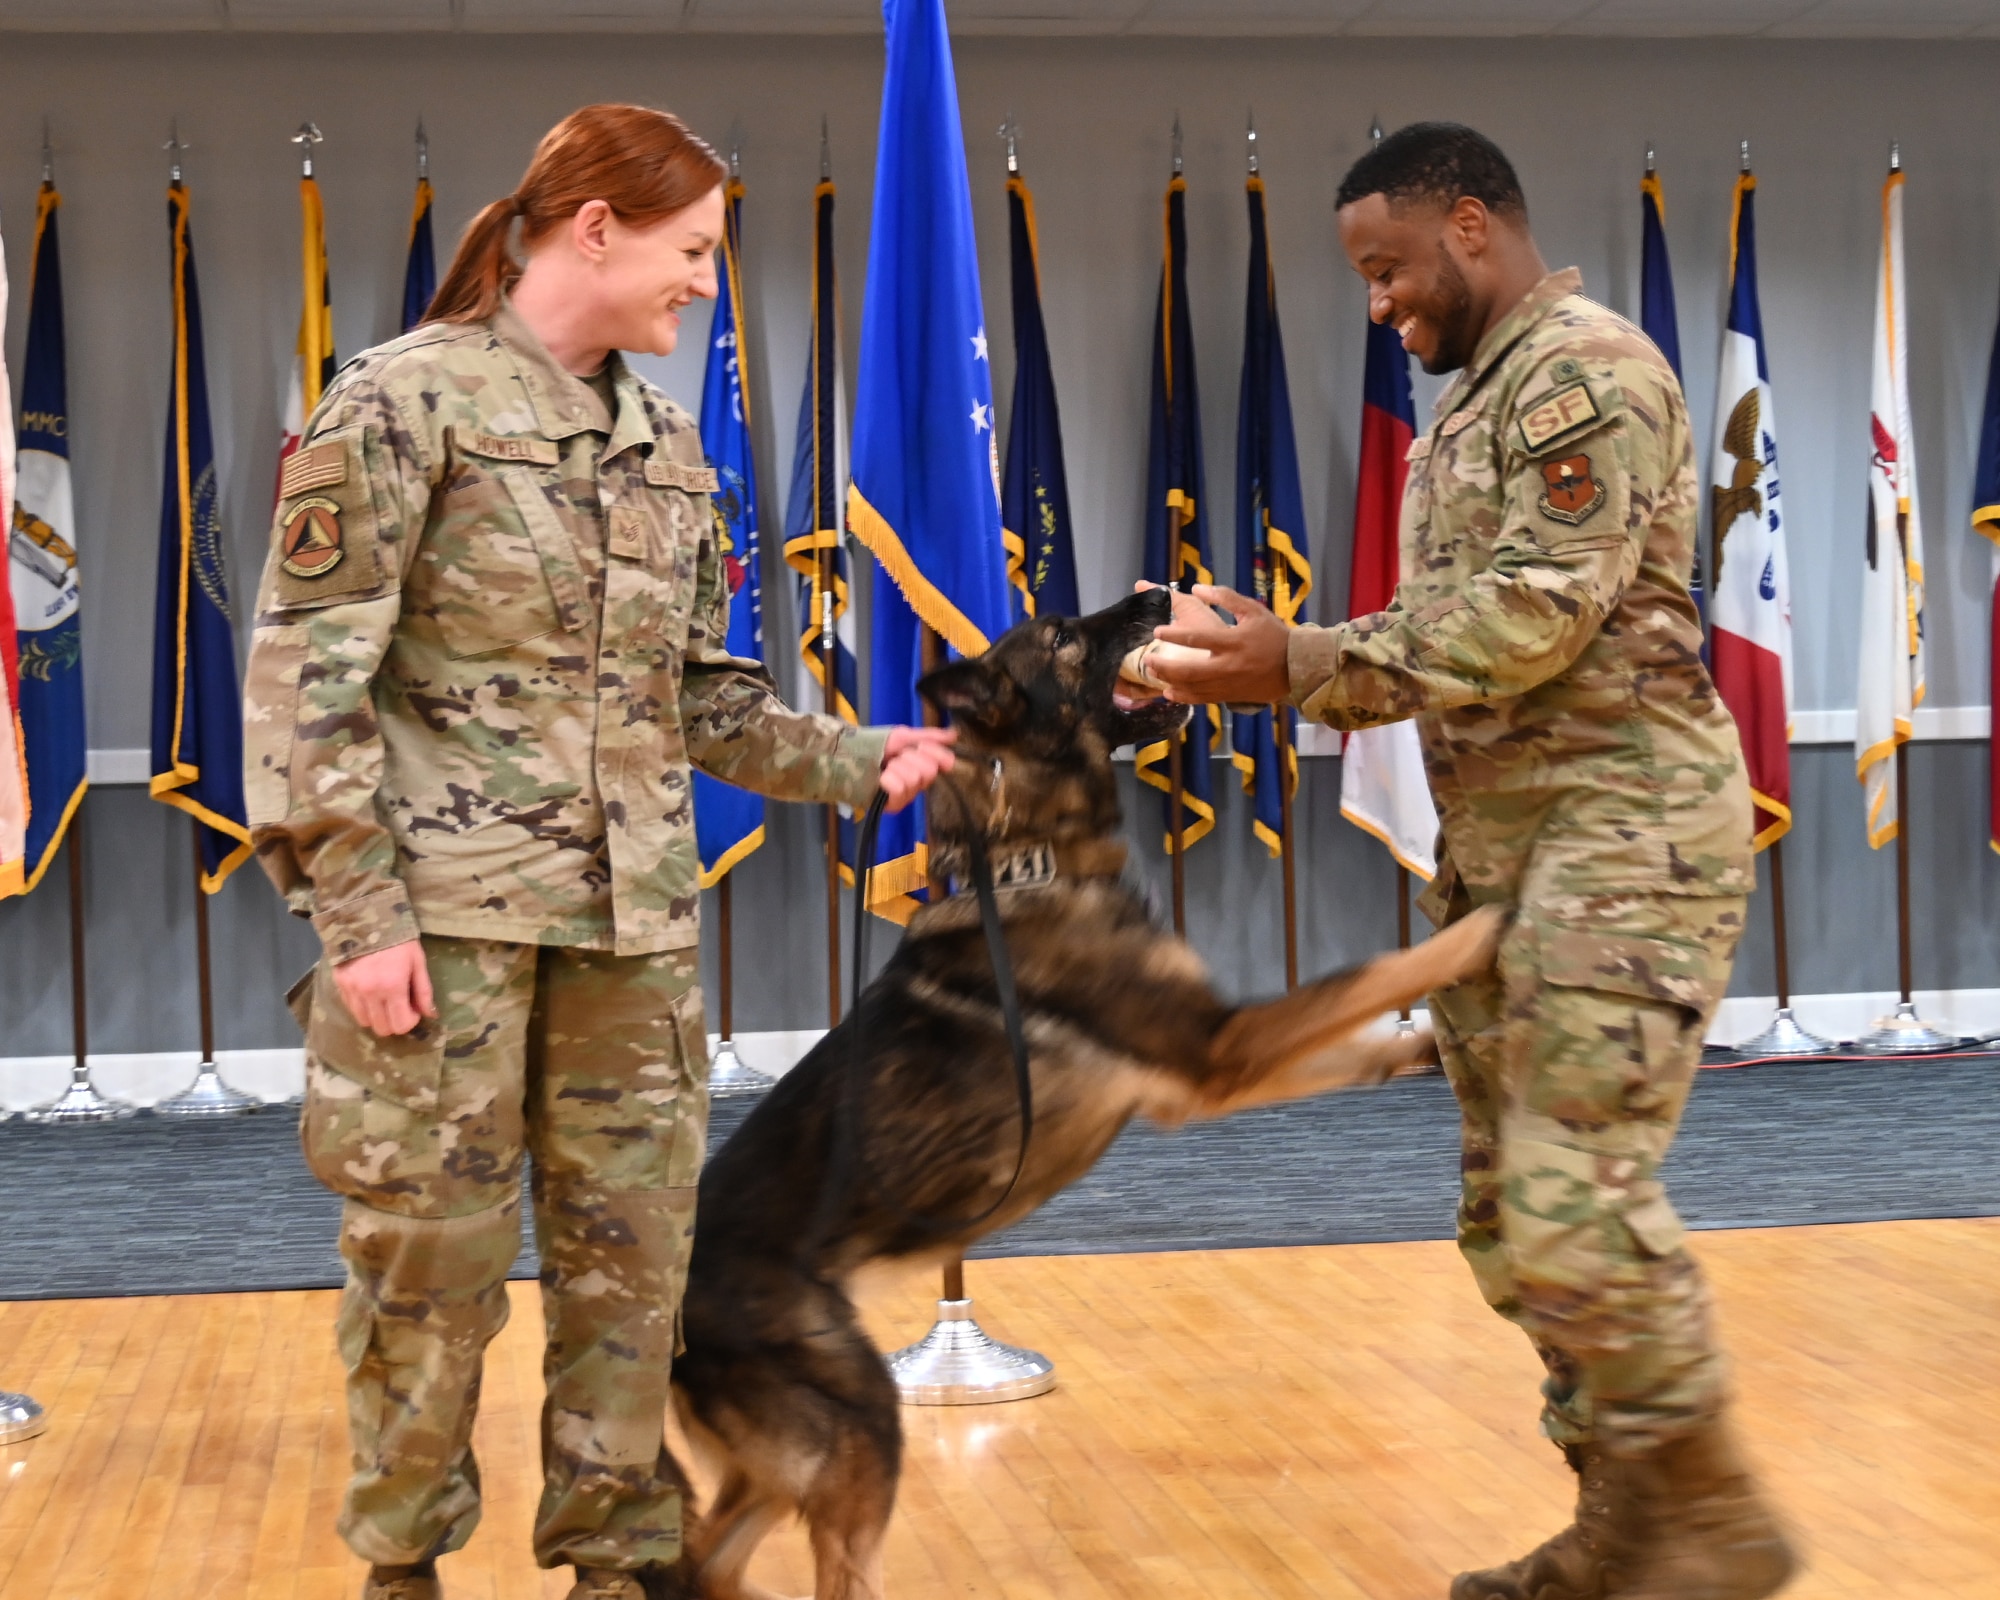 Security Forces Handlers award K-9 with a bone.